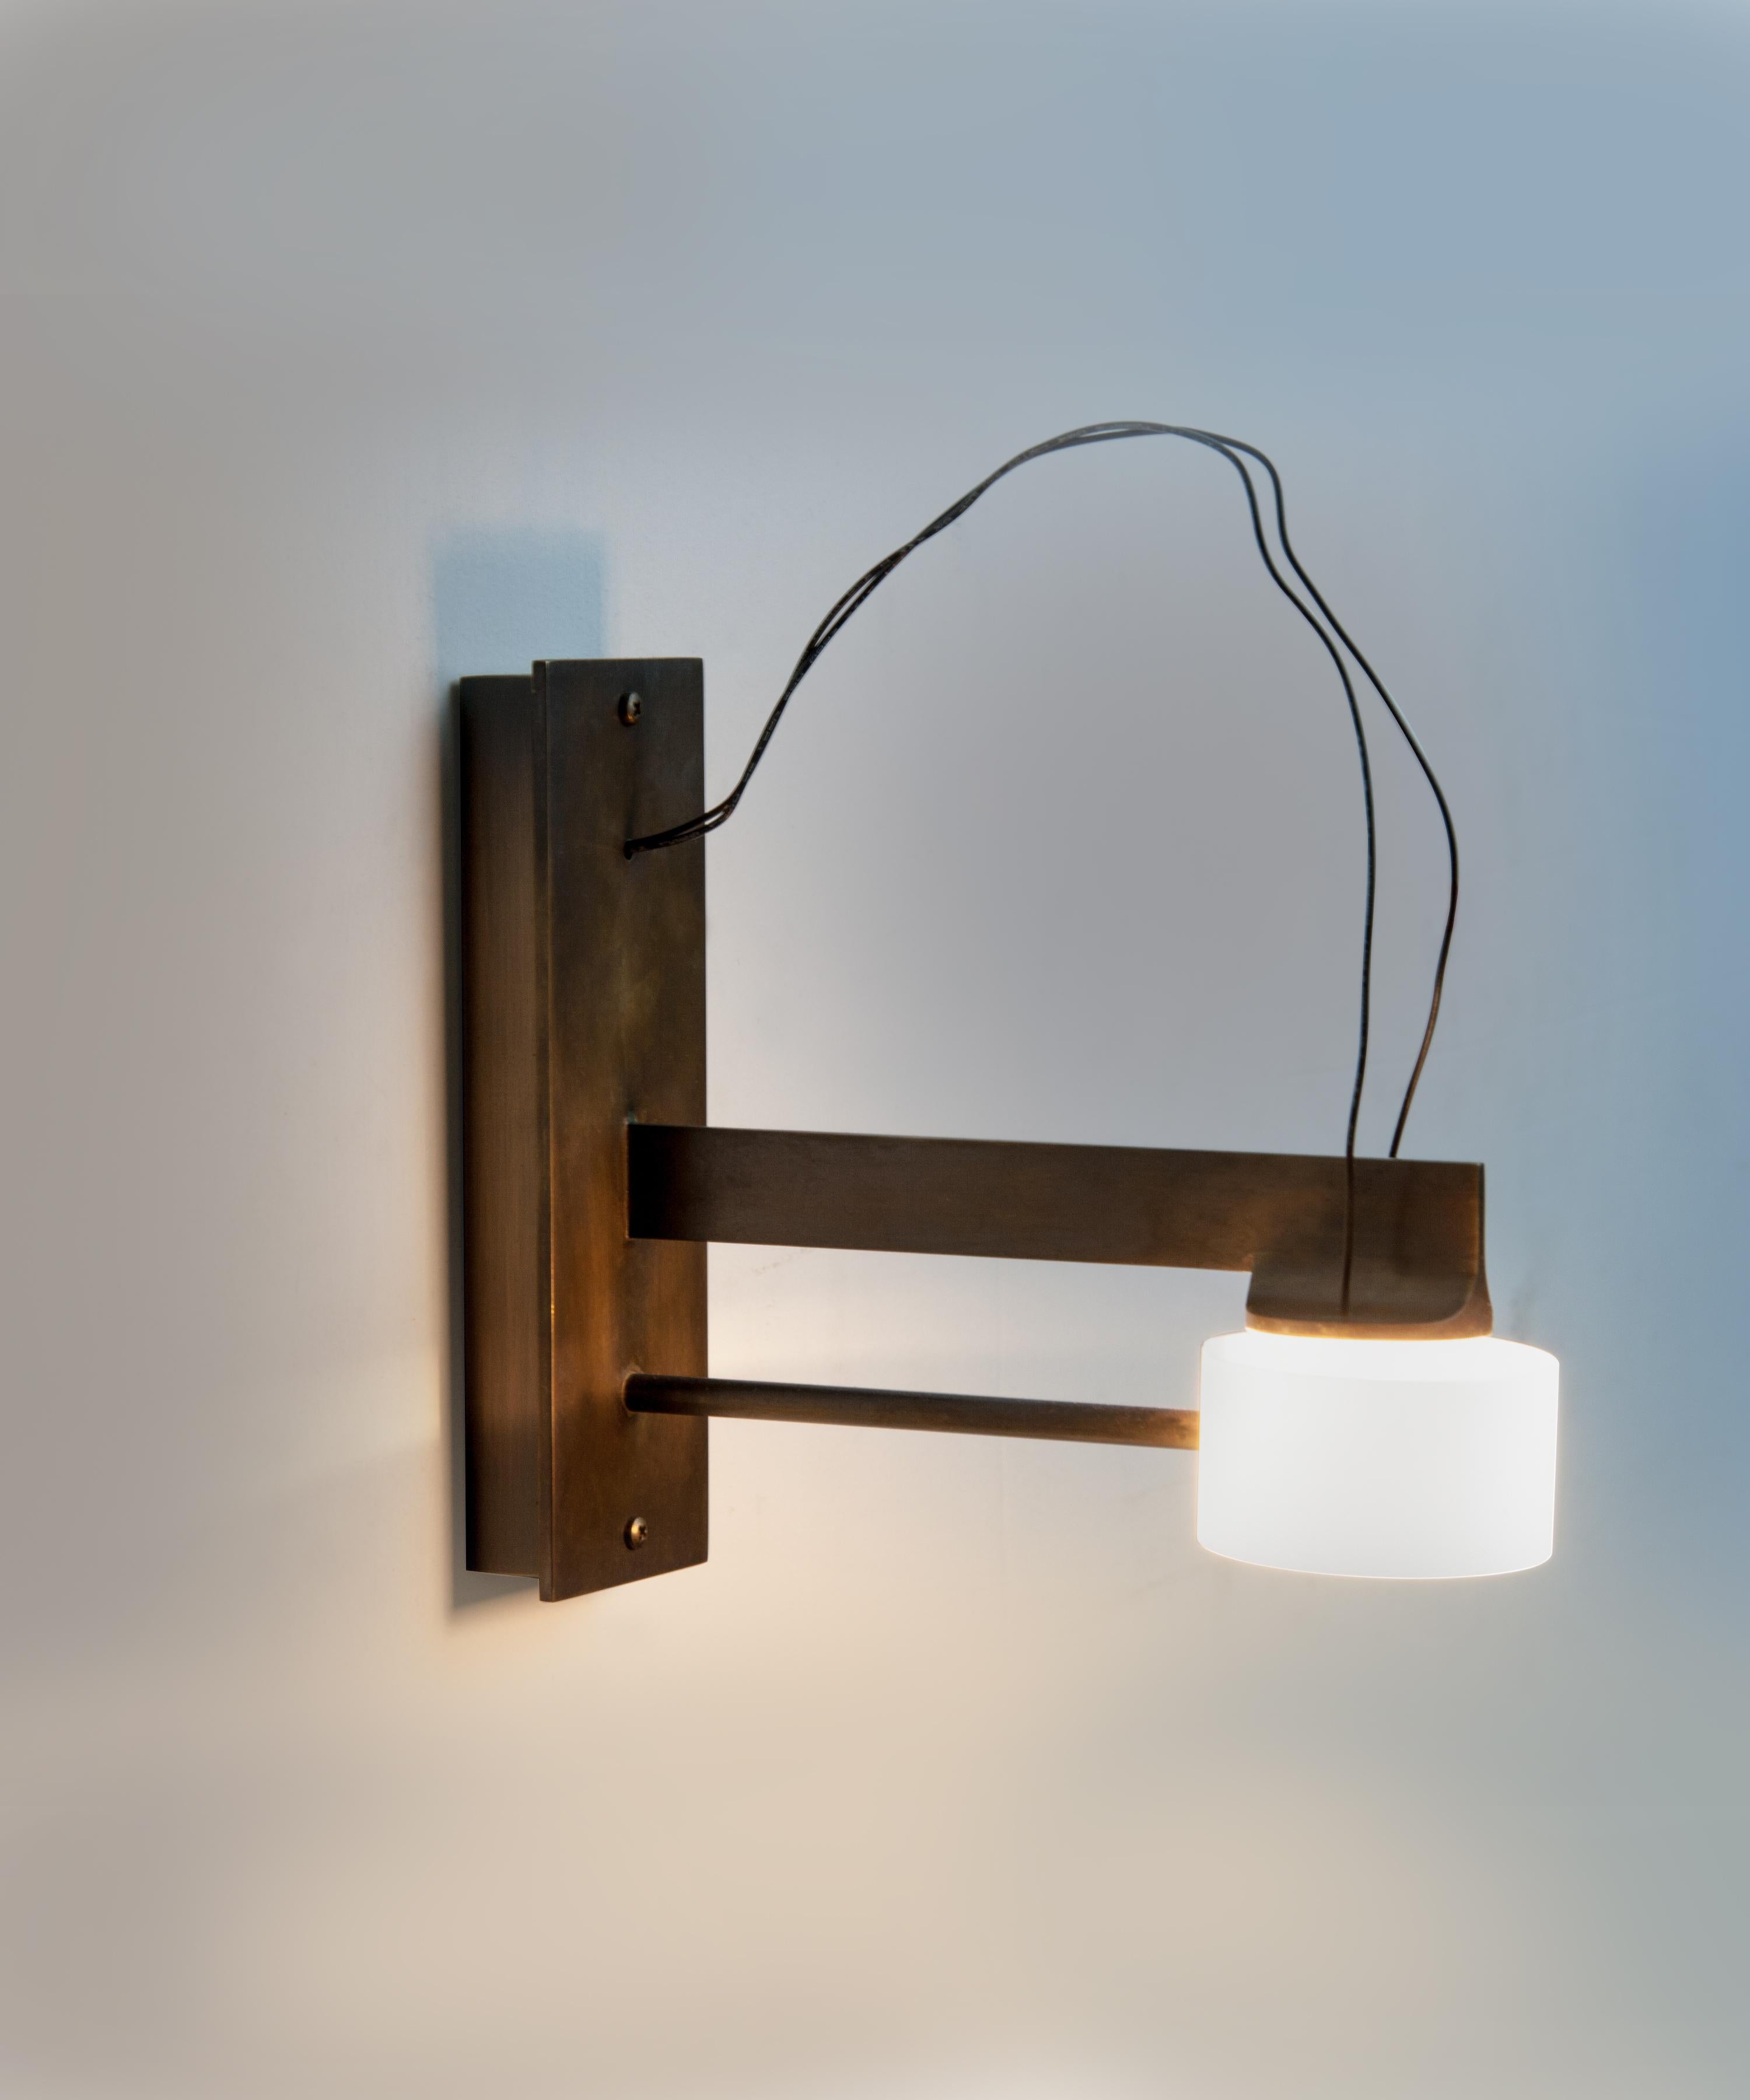 With wall lamp by Gentner Design
Dimensions: D 5 x W 17.7 x H 15 cm
Materials: brass

All our lamps can be wired according to each country. If sold to the USA it will be wired for the USA for instance.

Curious bright yet small, the LED wall